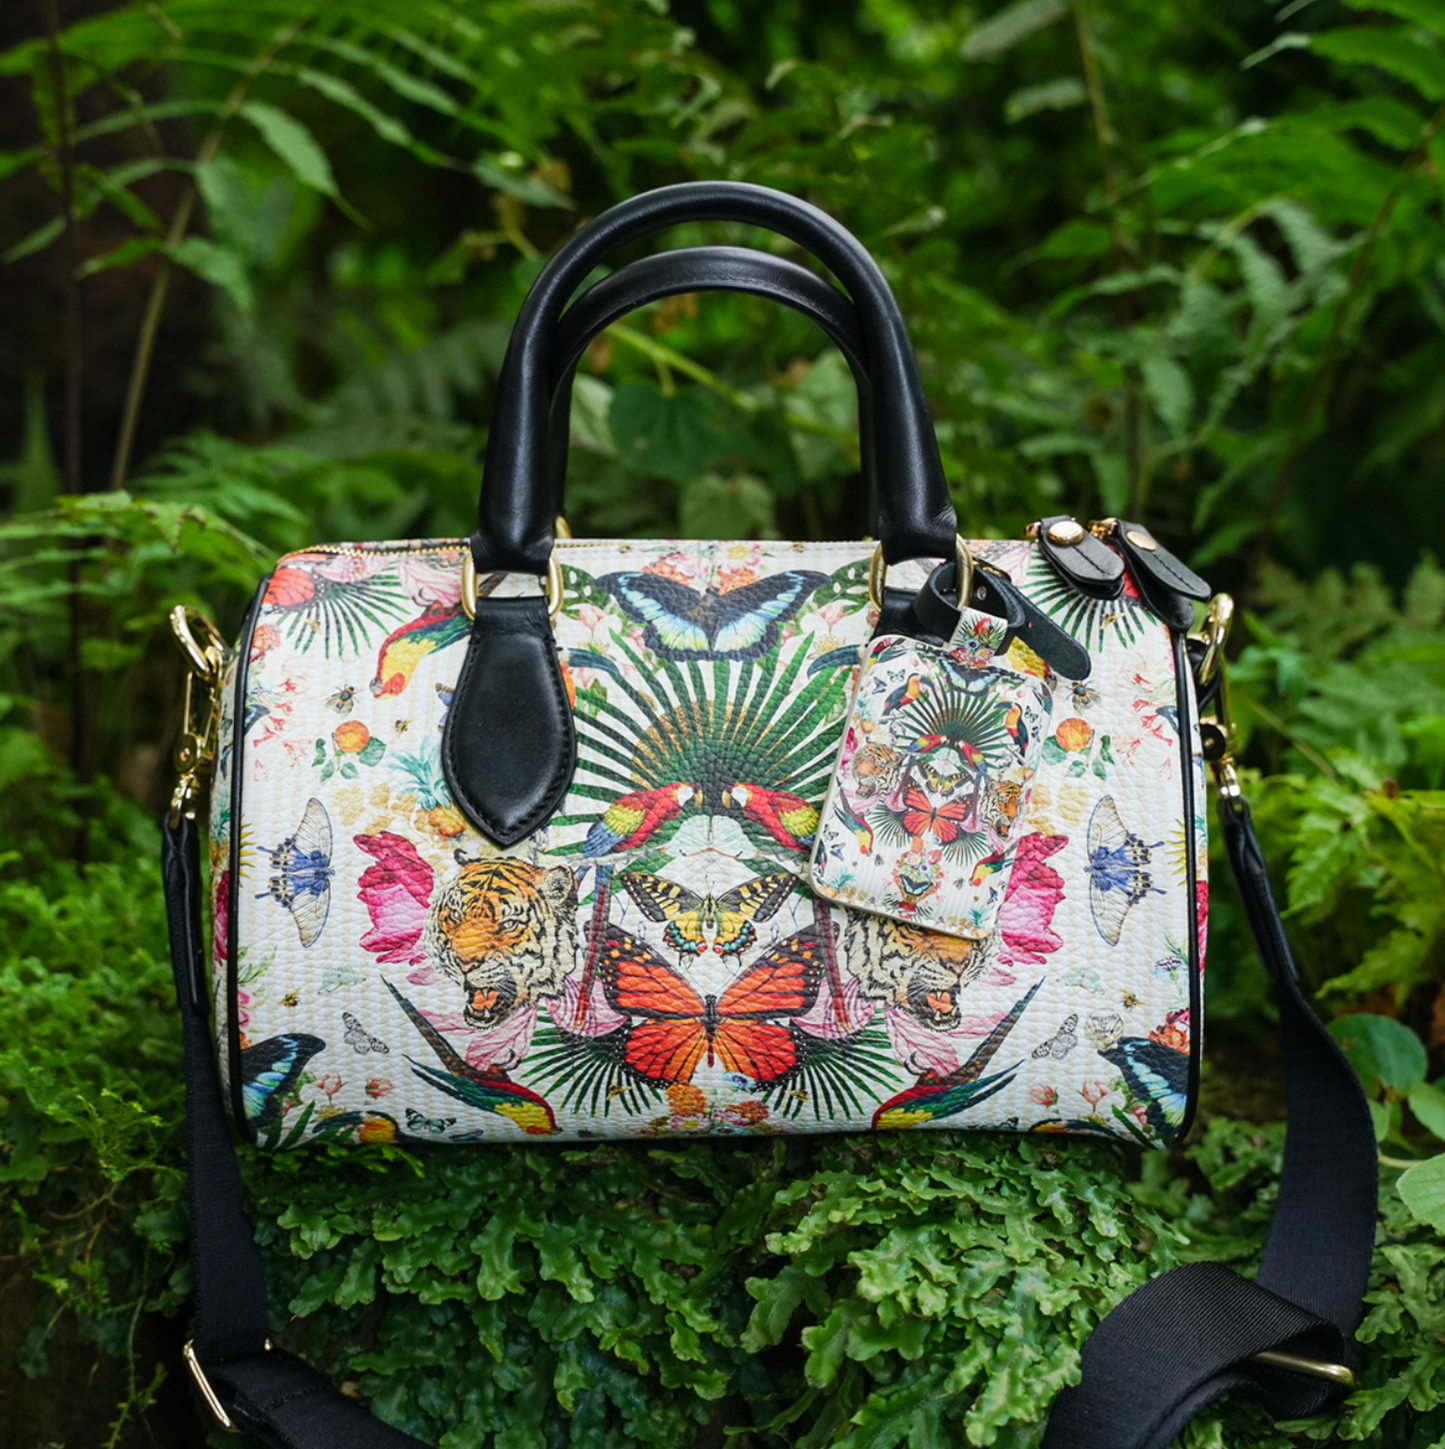 Paradise Lost "Day" - Carrie Duffle Bag